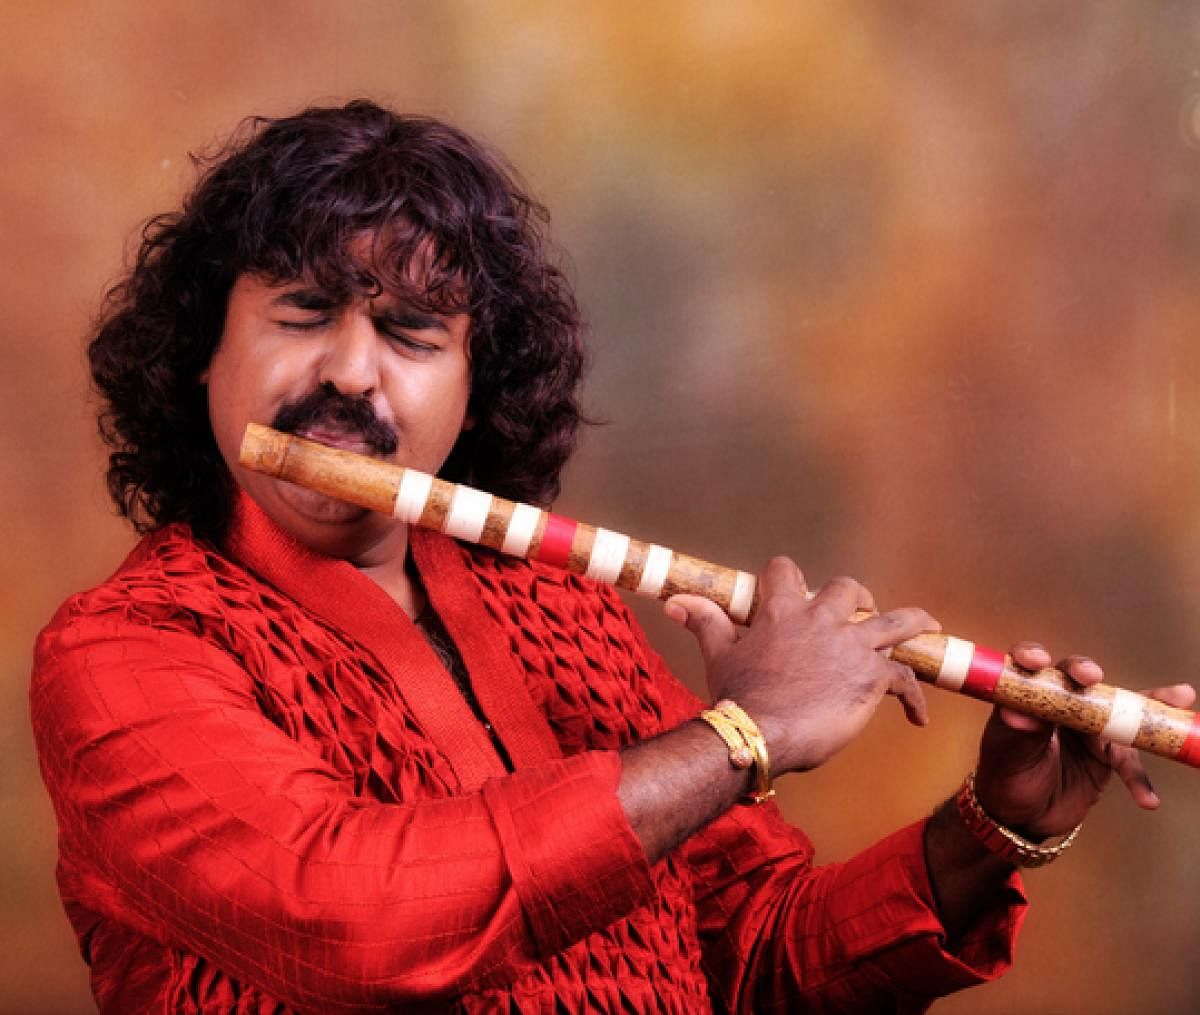 Renowned flautist Pravin Godkhindi has introduced rare ragas in Raagatainment, his music series now in its 50th week.